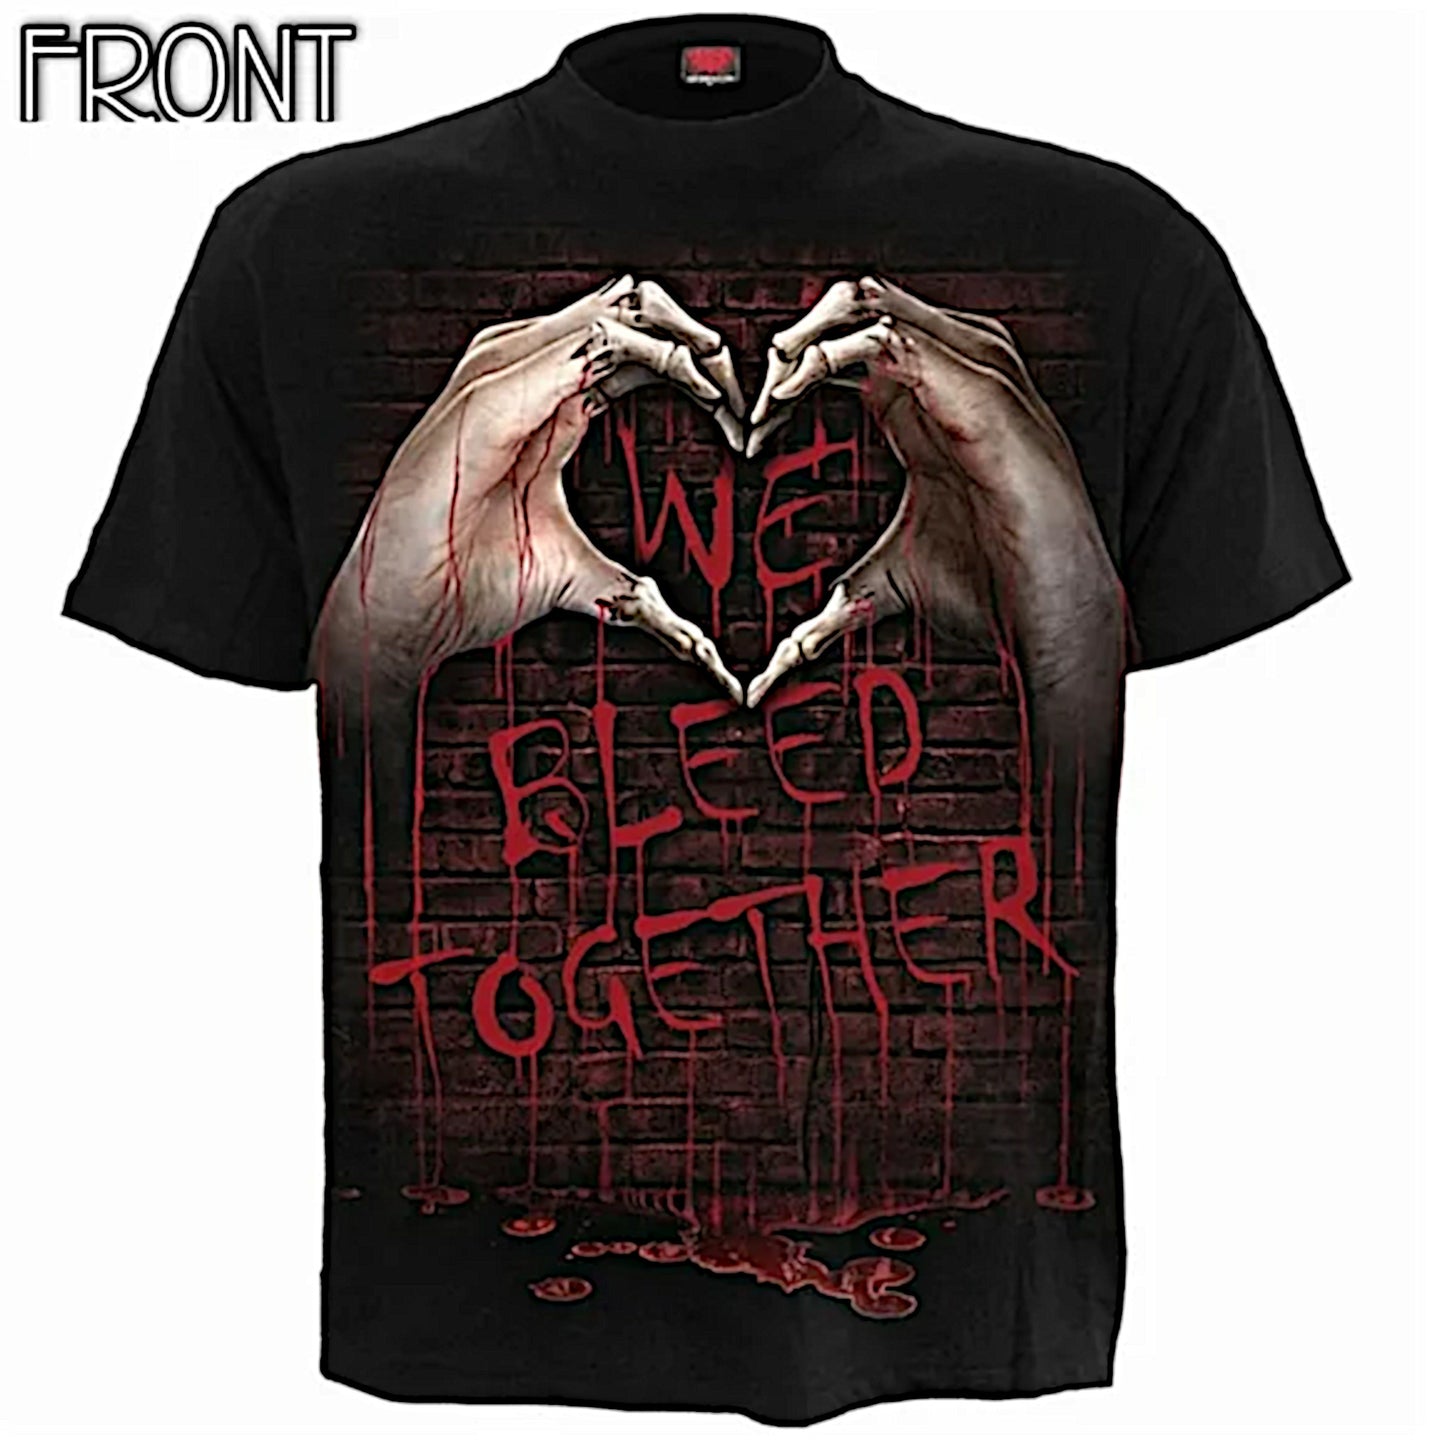 Men's Graphic Tee | We Bleed Together | Covid-19 Collectors Black Tee - Spiral Direct - Shirts